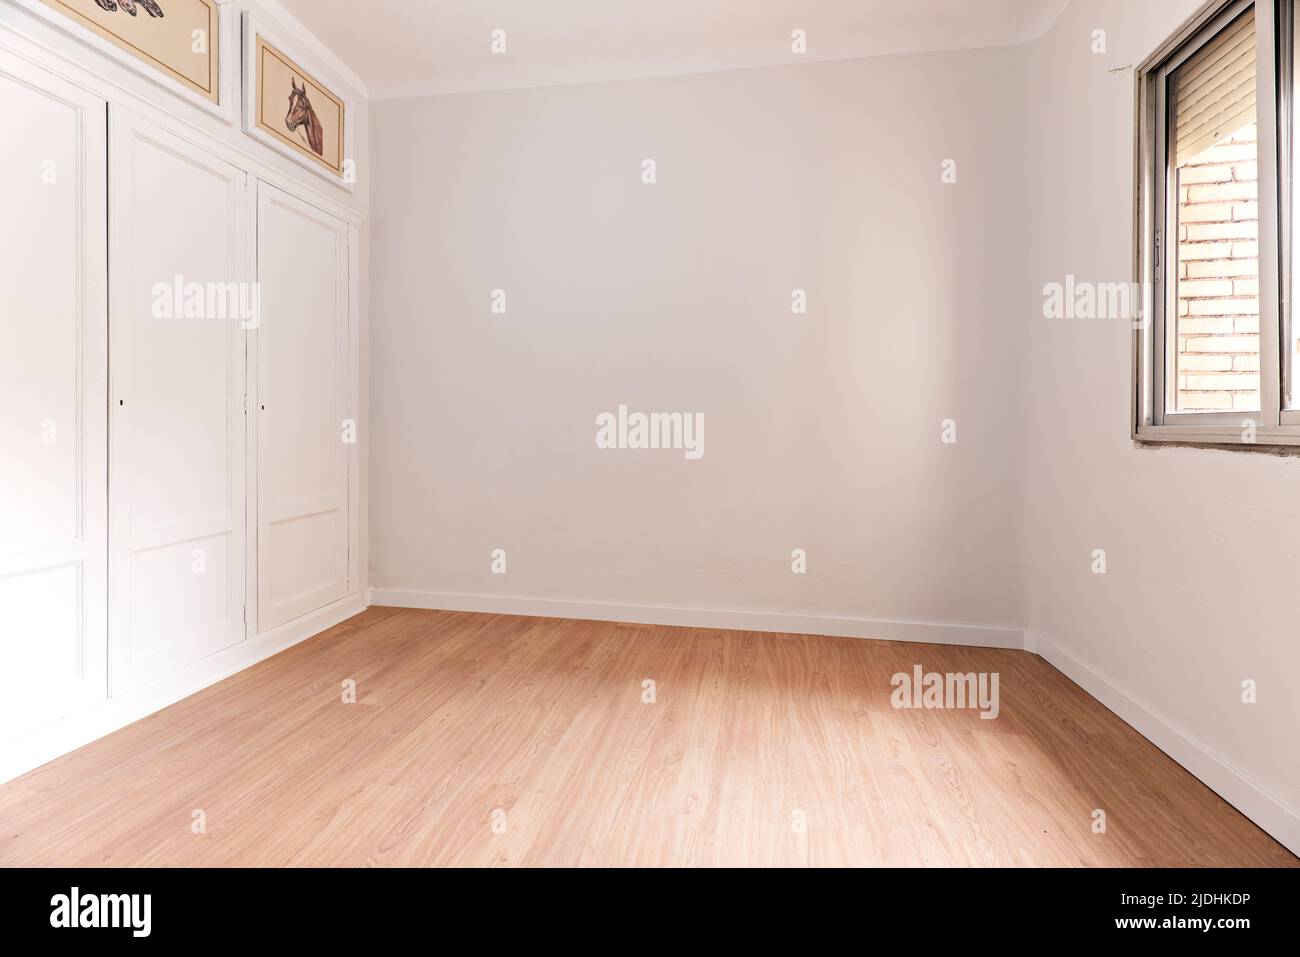 Empty room with oak parquet floor, white painted walls, built-in wardrobe with wooden doors and aluminum window Stock Photo